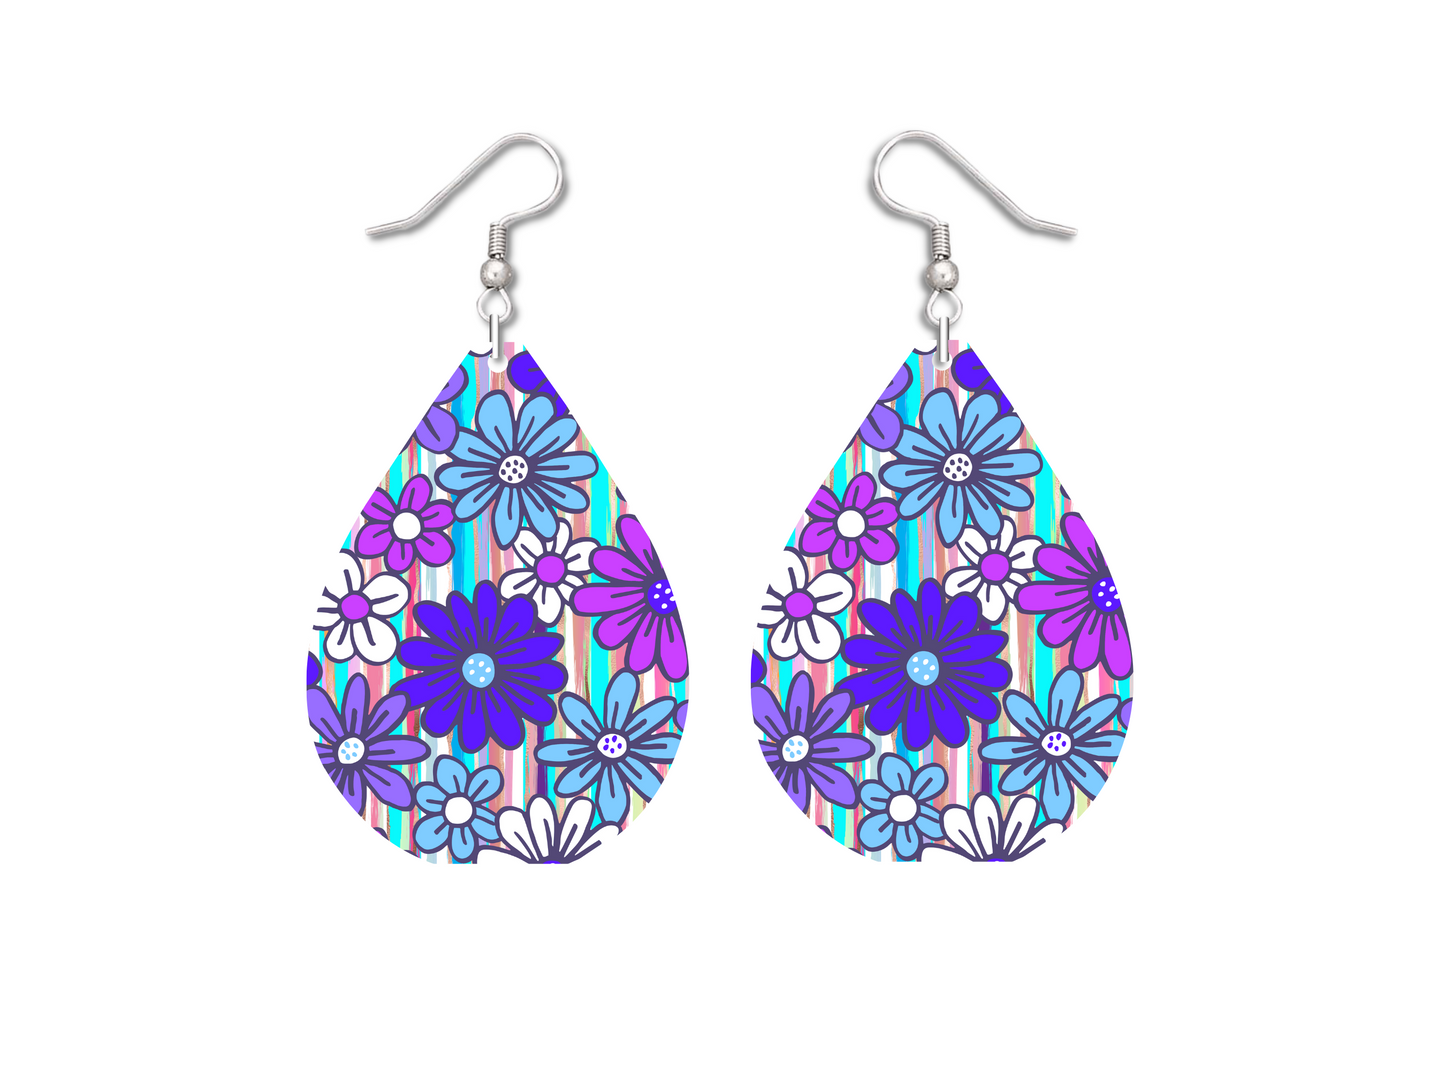 Enchanting Blossoms: Teardrop Earrings in Bright Blue, Purple, and Pink